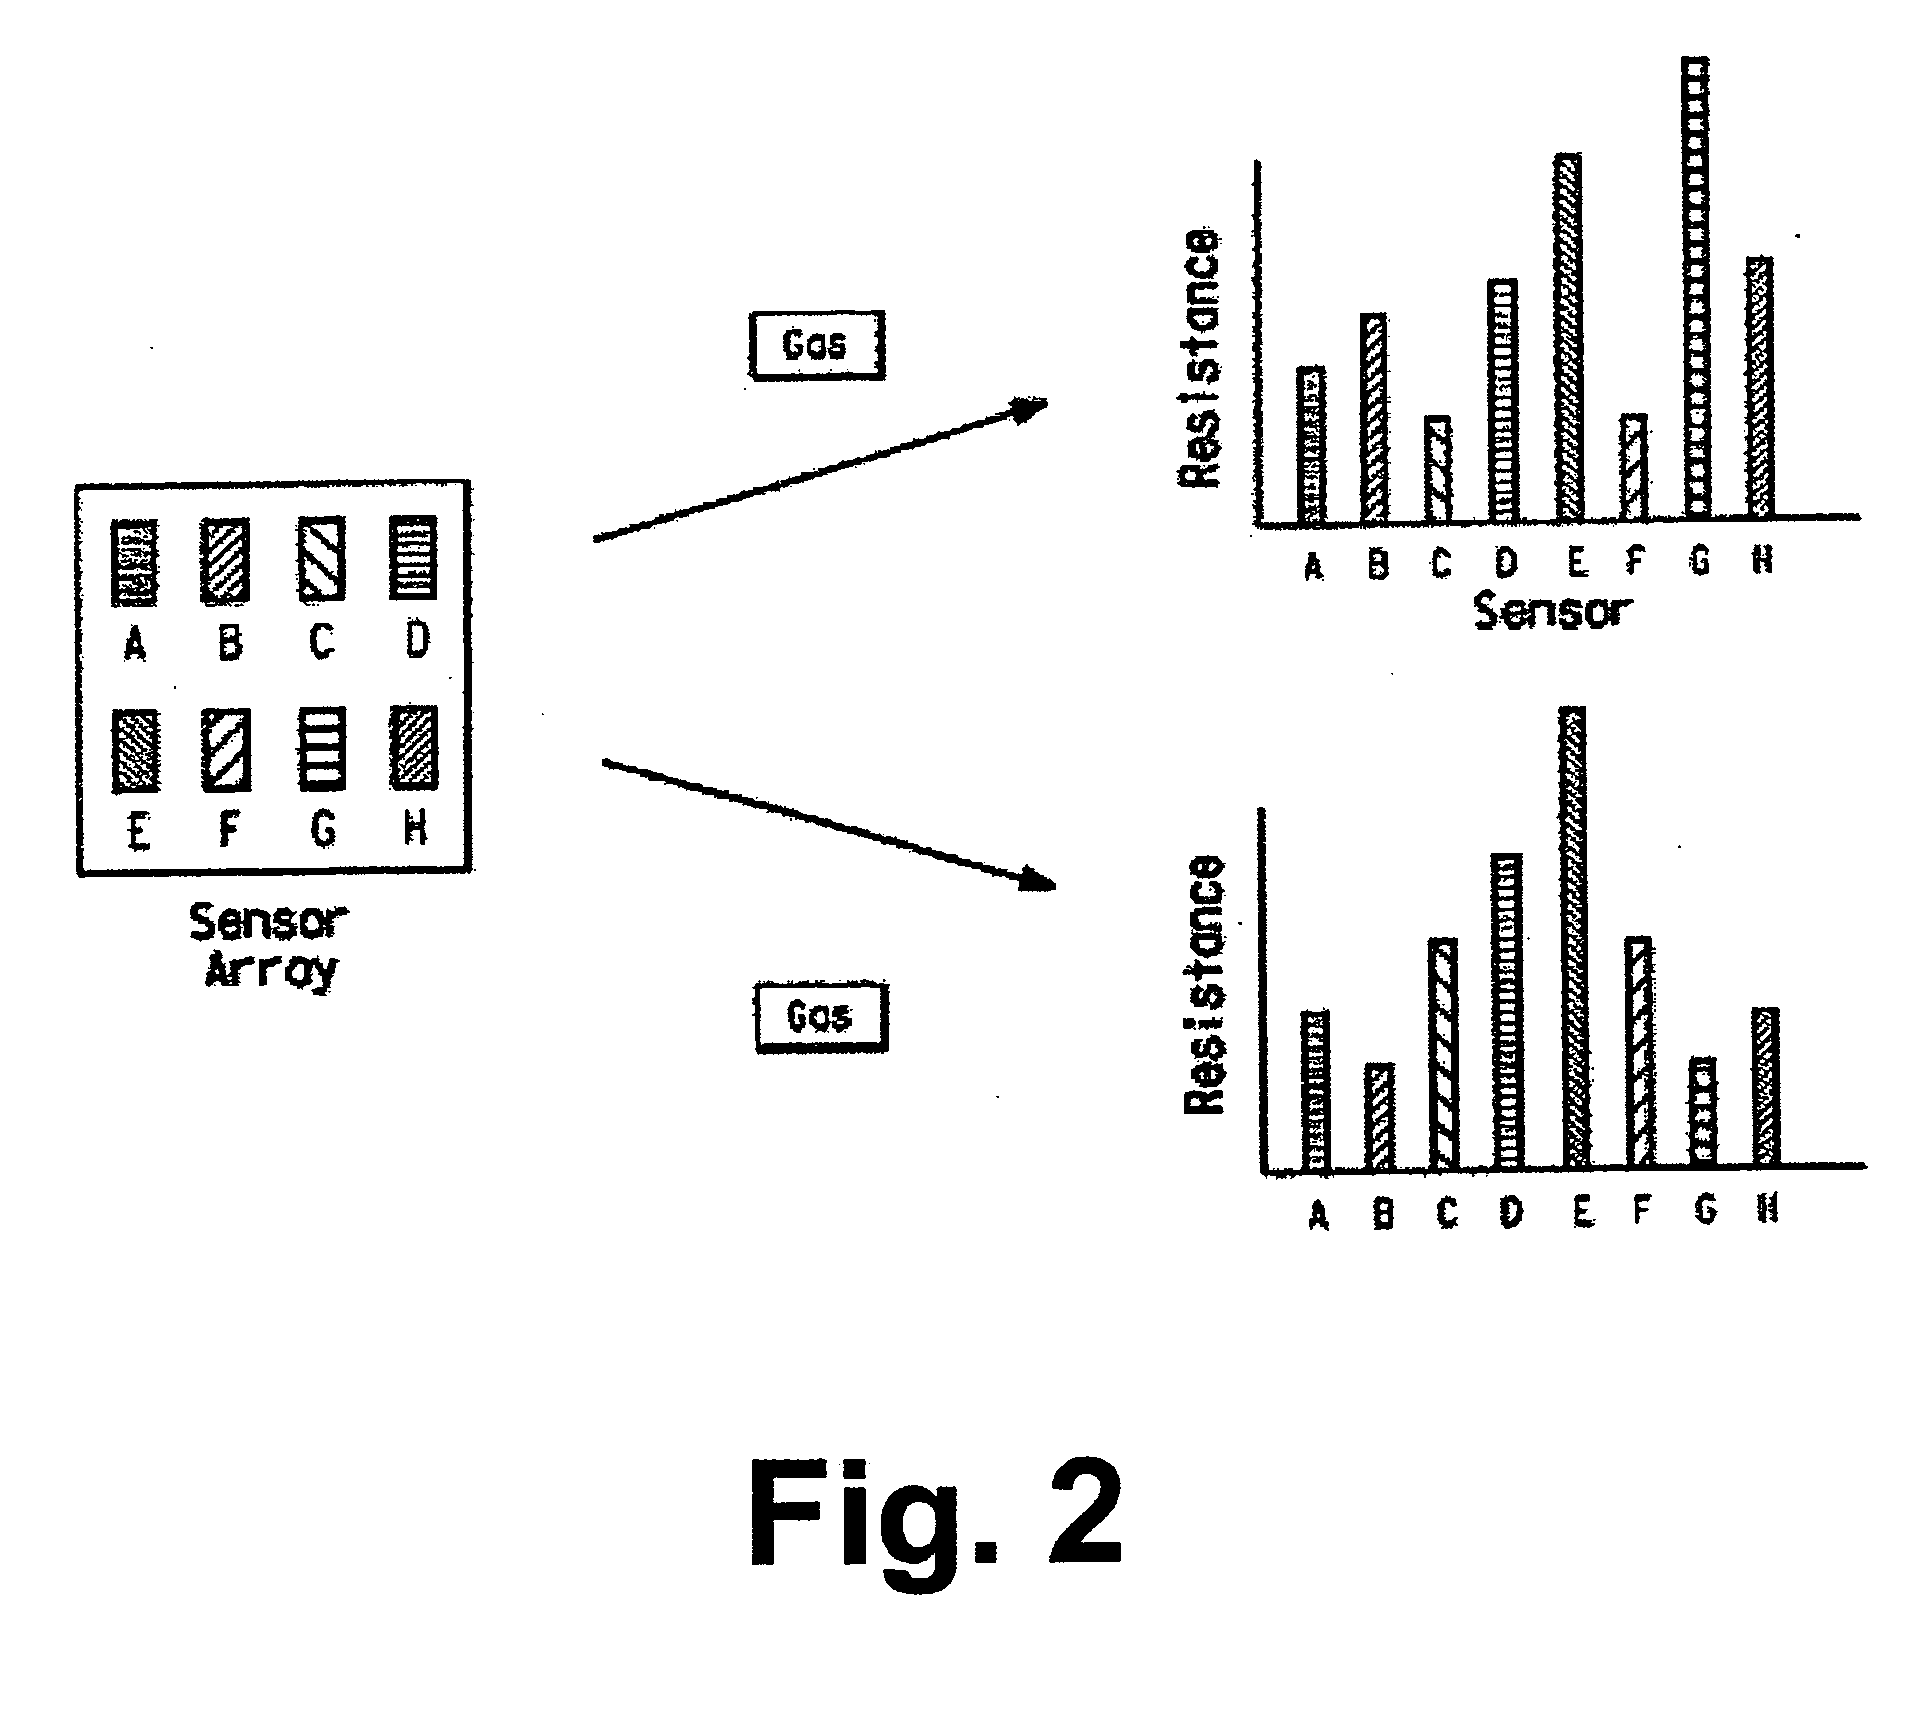 Computer-implemented system and method for analyzing mixtures of gases